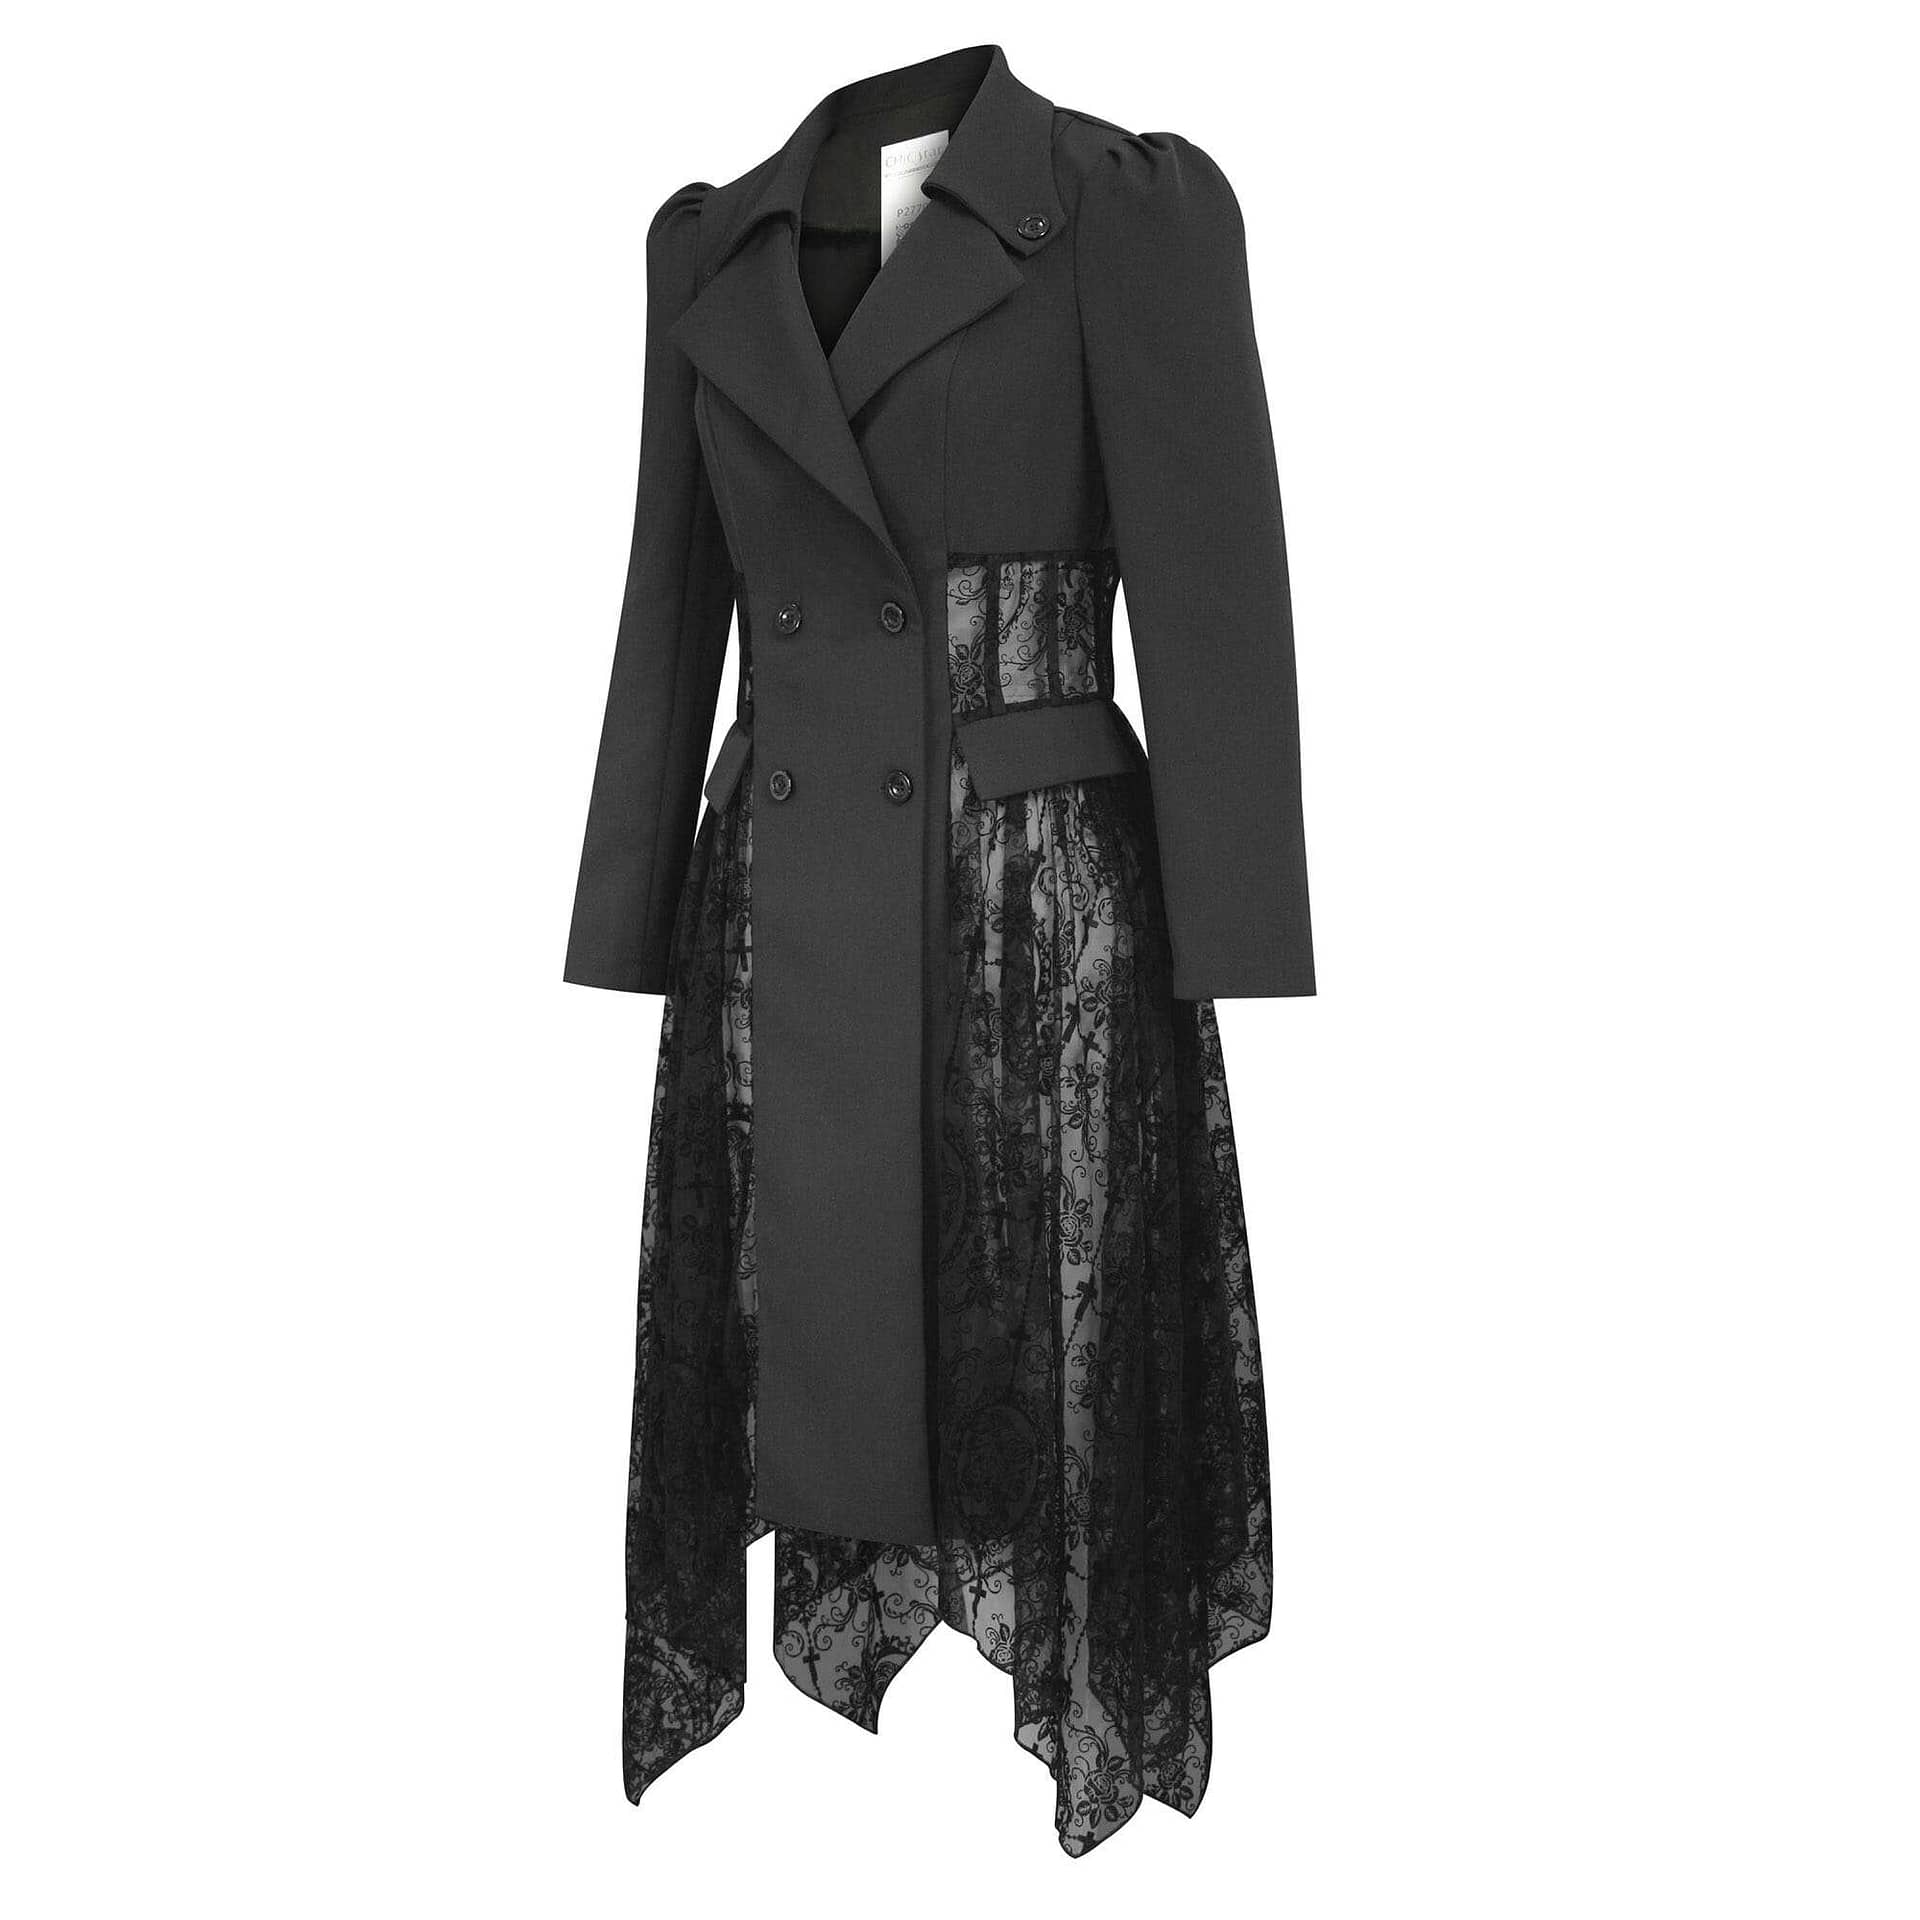 Lace Trench Jacket - Valkyrie Apparel